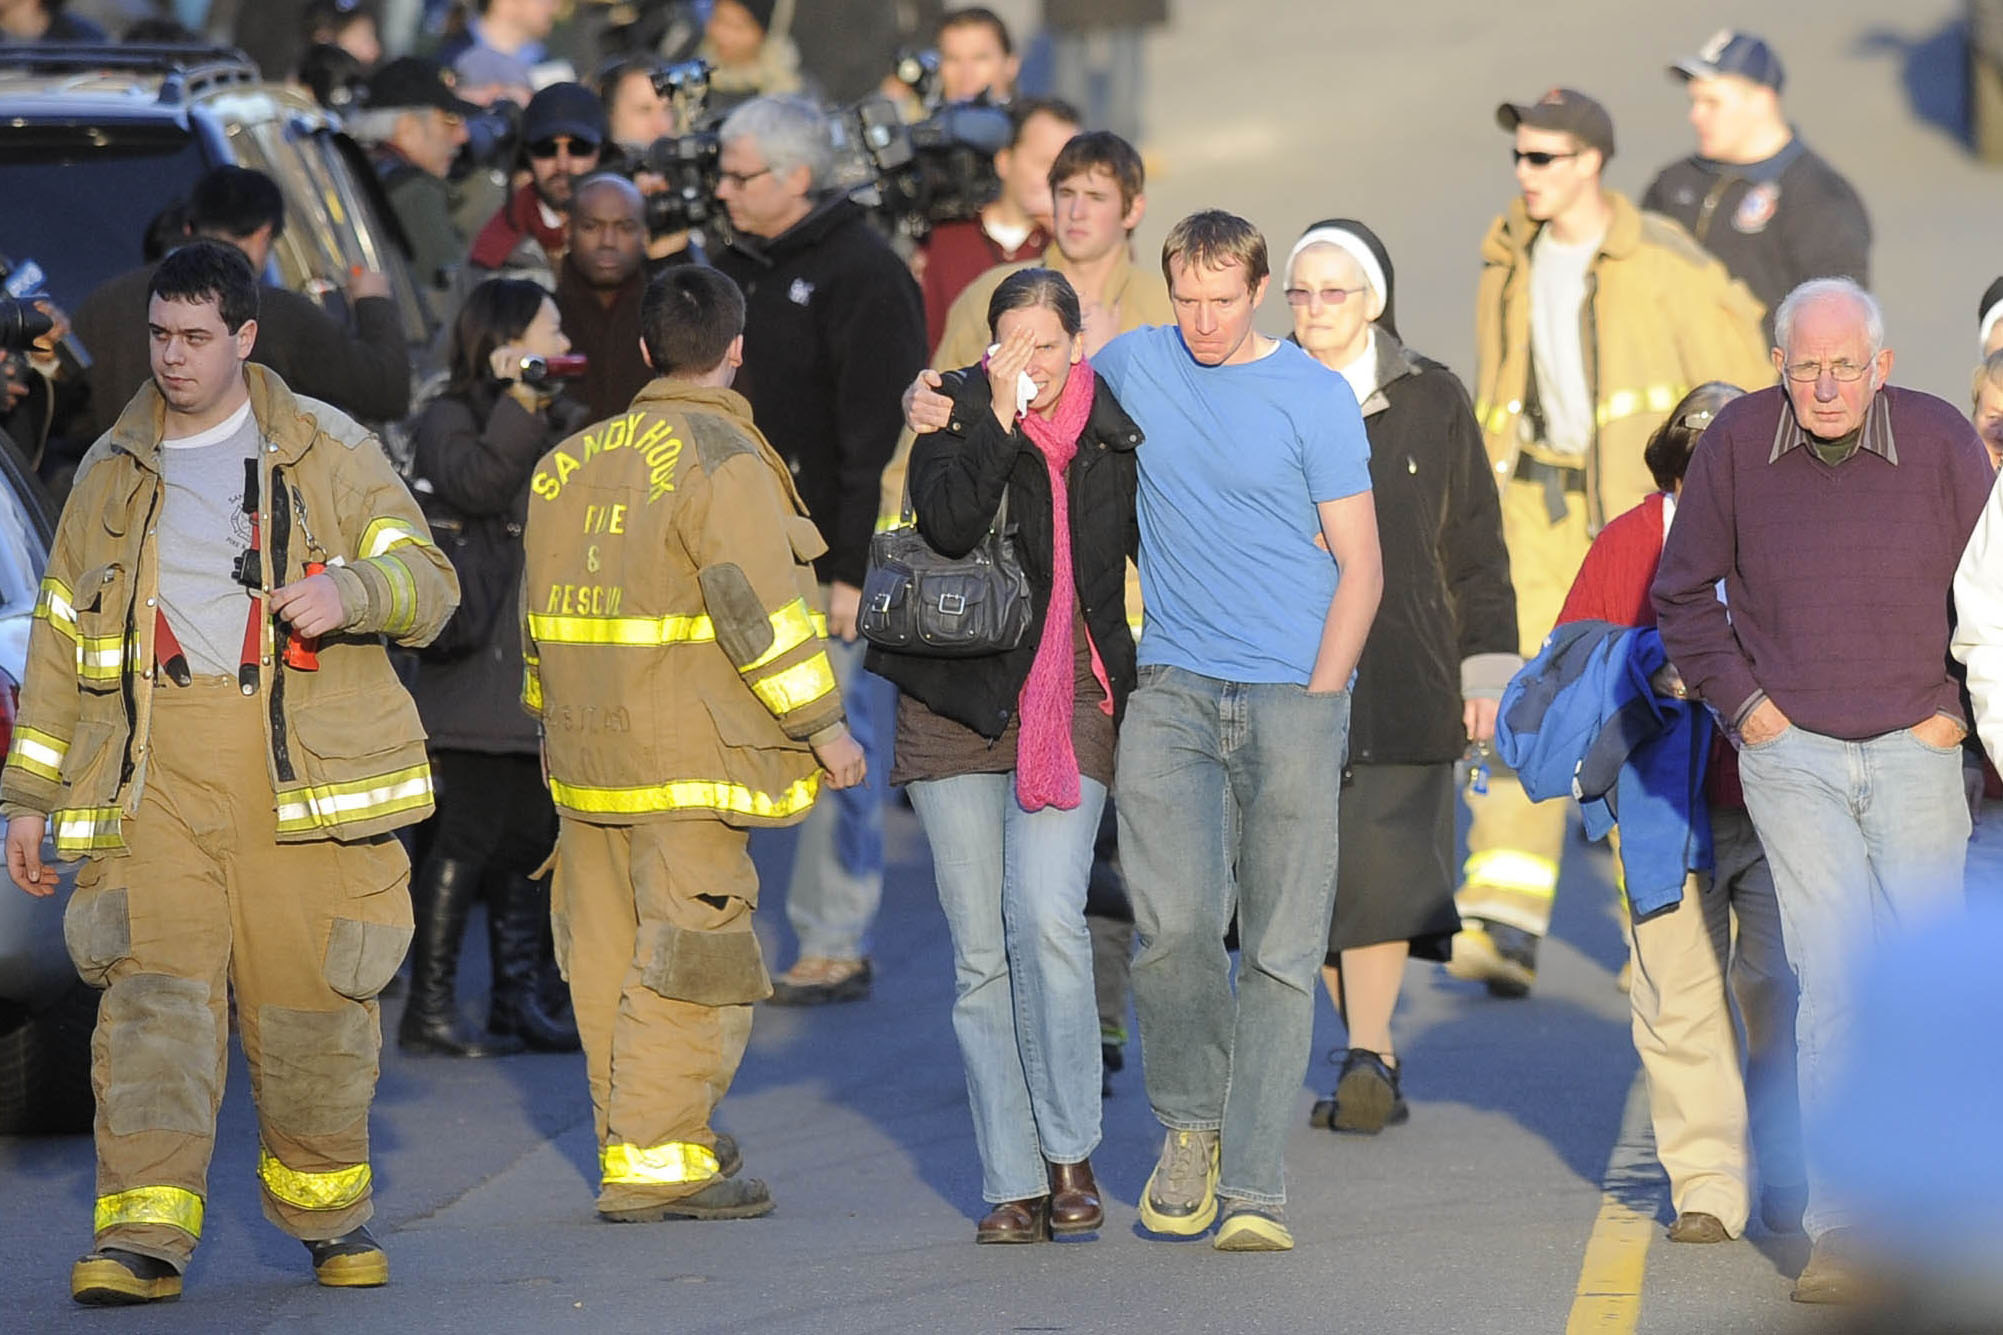 IN PHOTOS: Aftermath of Newtown school shooting